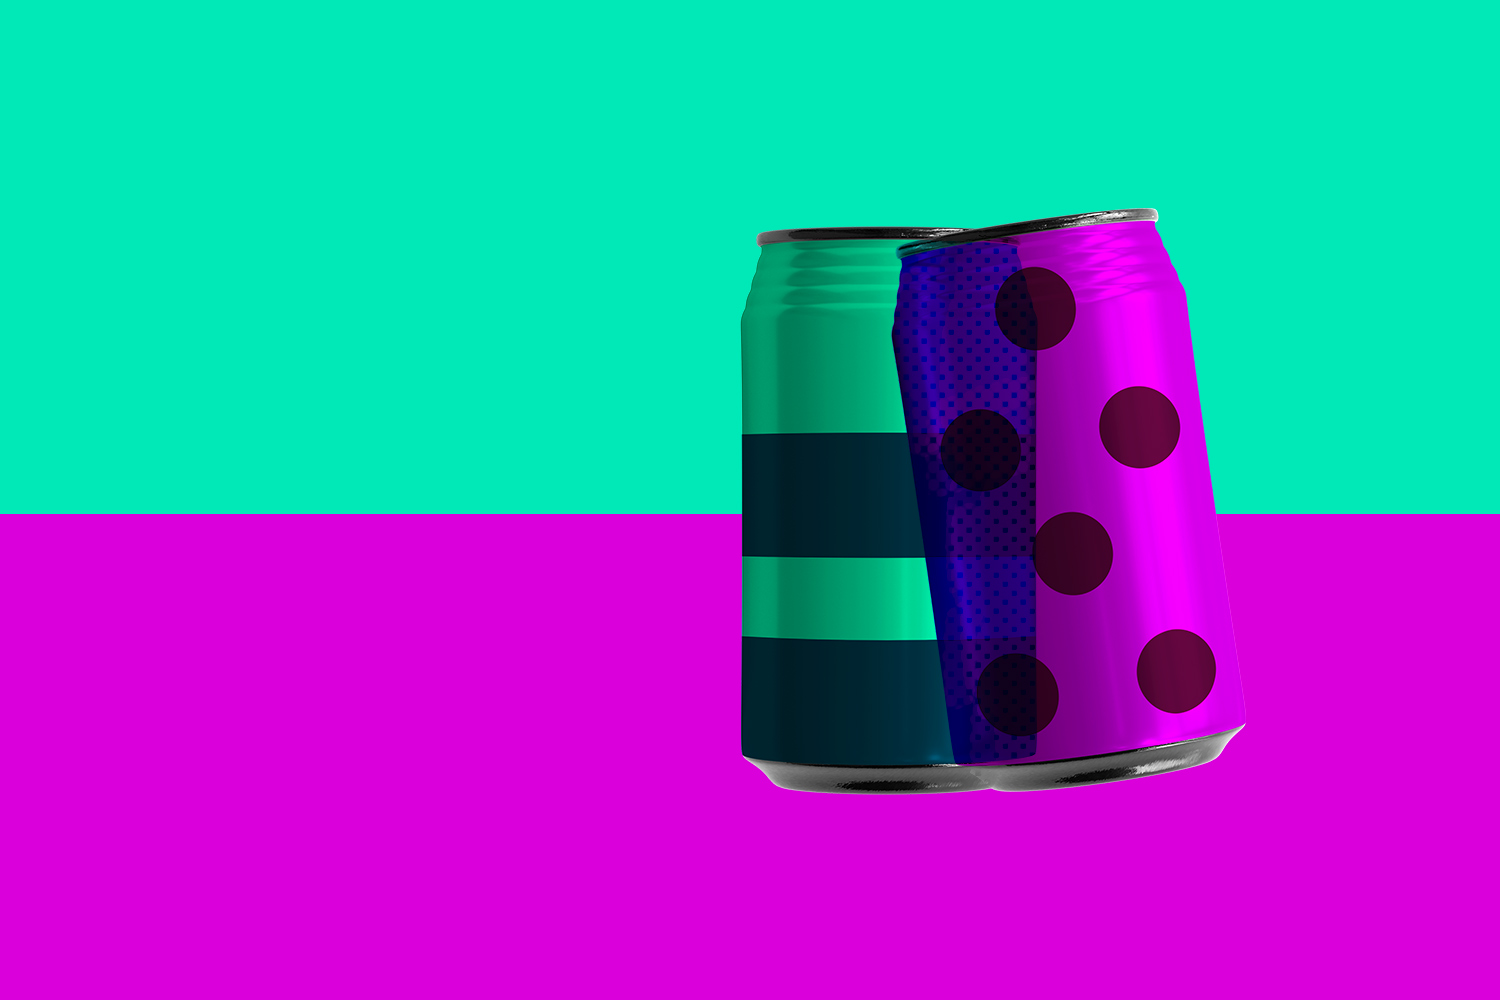 Two colourful cans with stripes and polka dots against a teal and hot pink background.